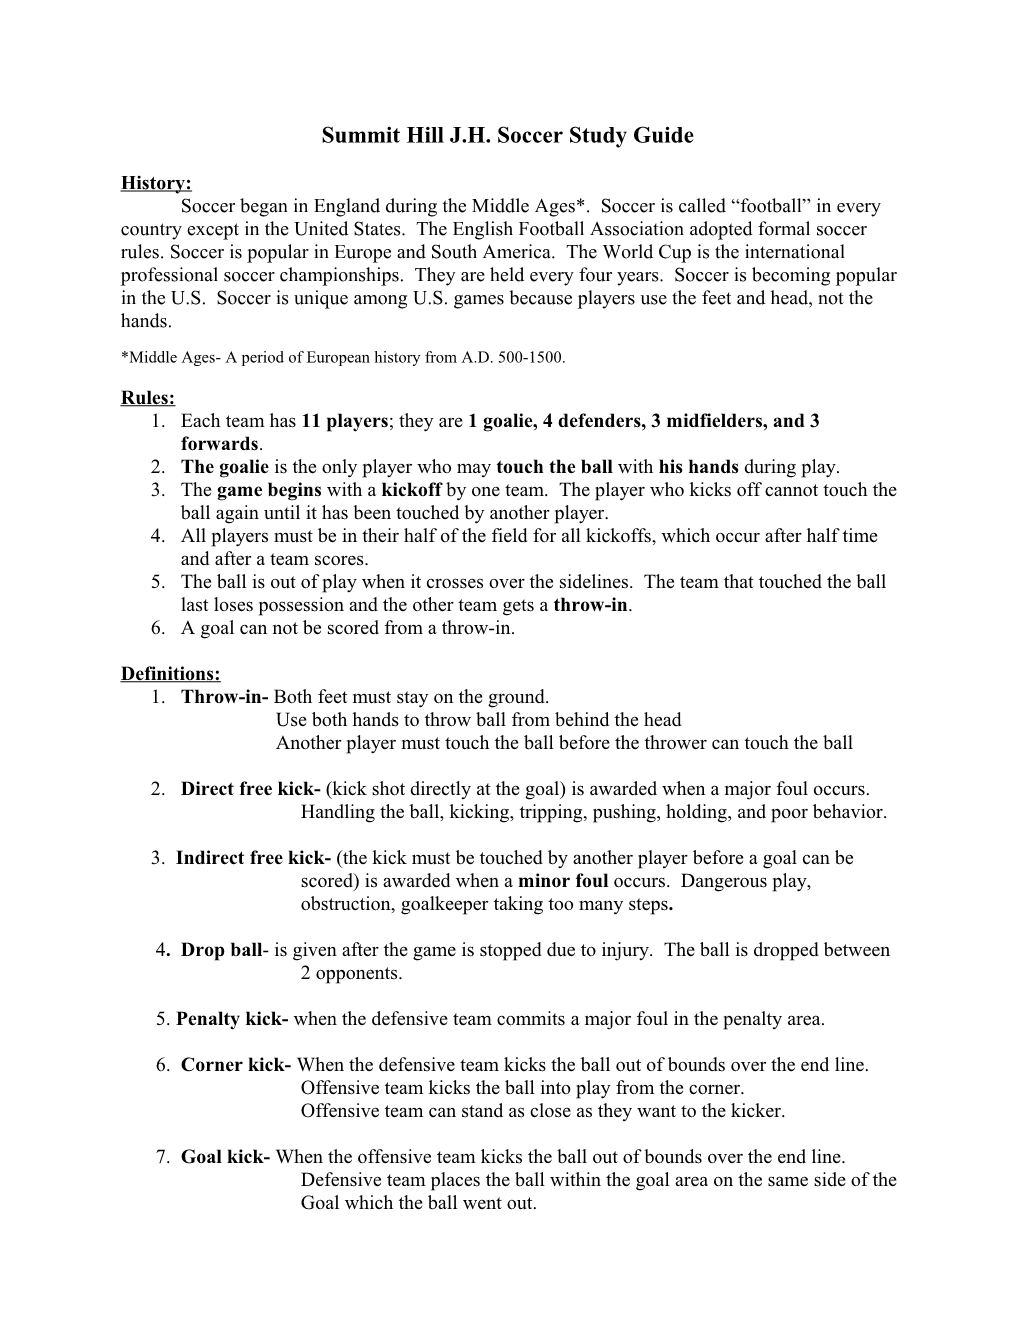 Summit Hill J.H. Soccer Study Guide